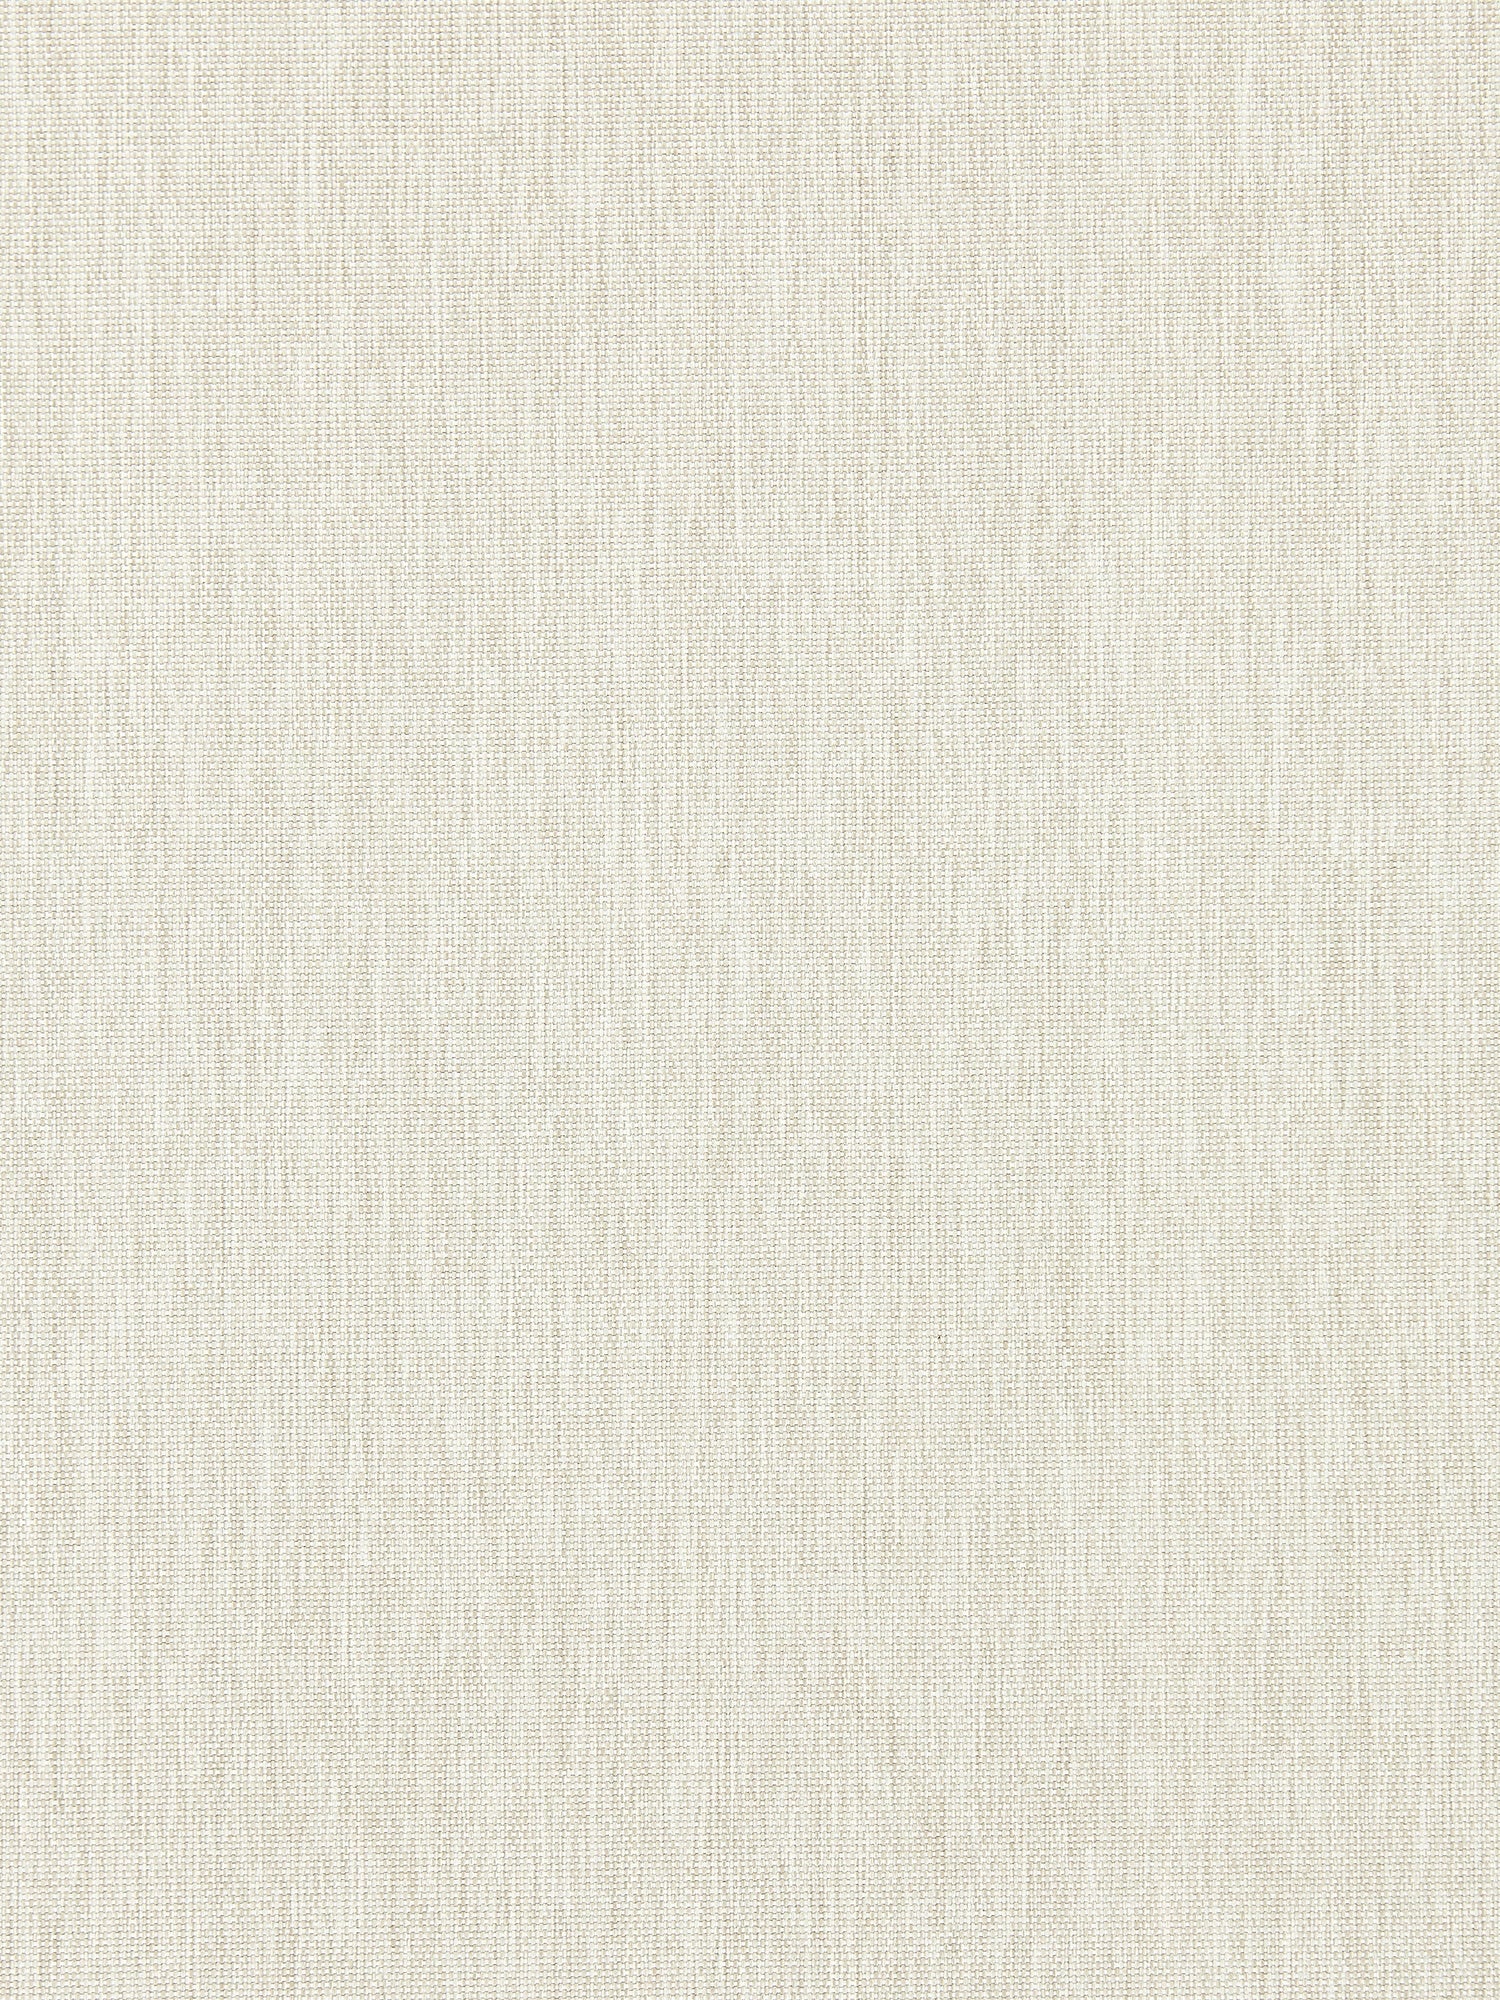 Canvas fabric in linen color - pattern number SC 000127067 - by Scalamandre in the Scalamandre Fabrics Book 1 collection